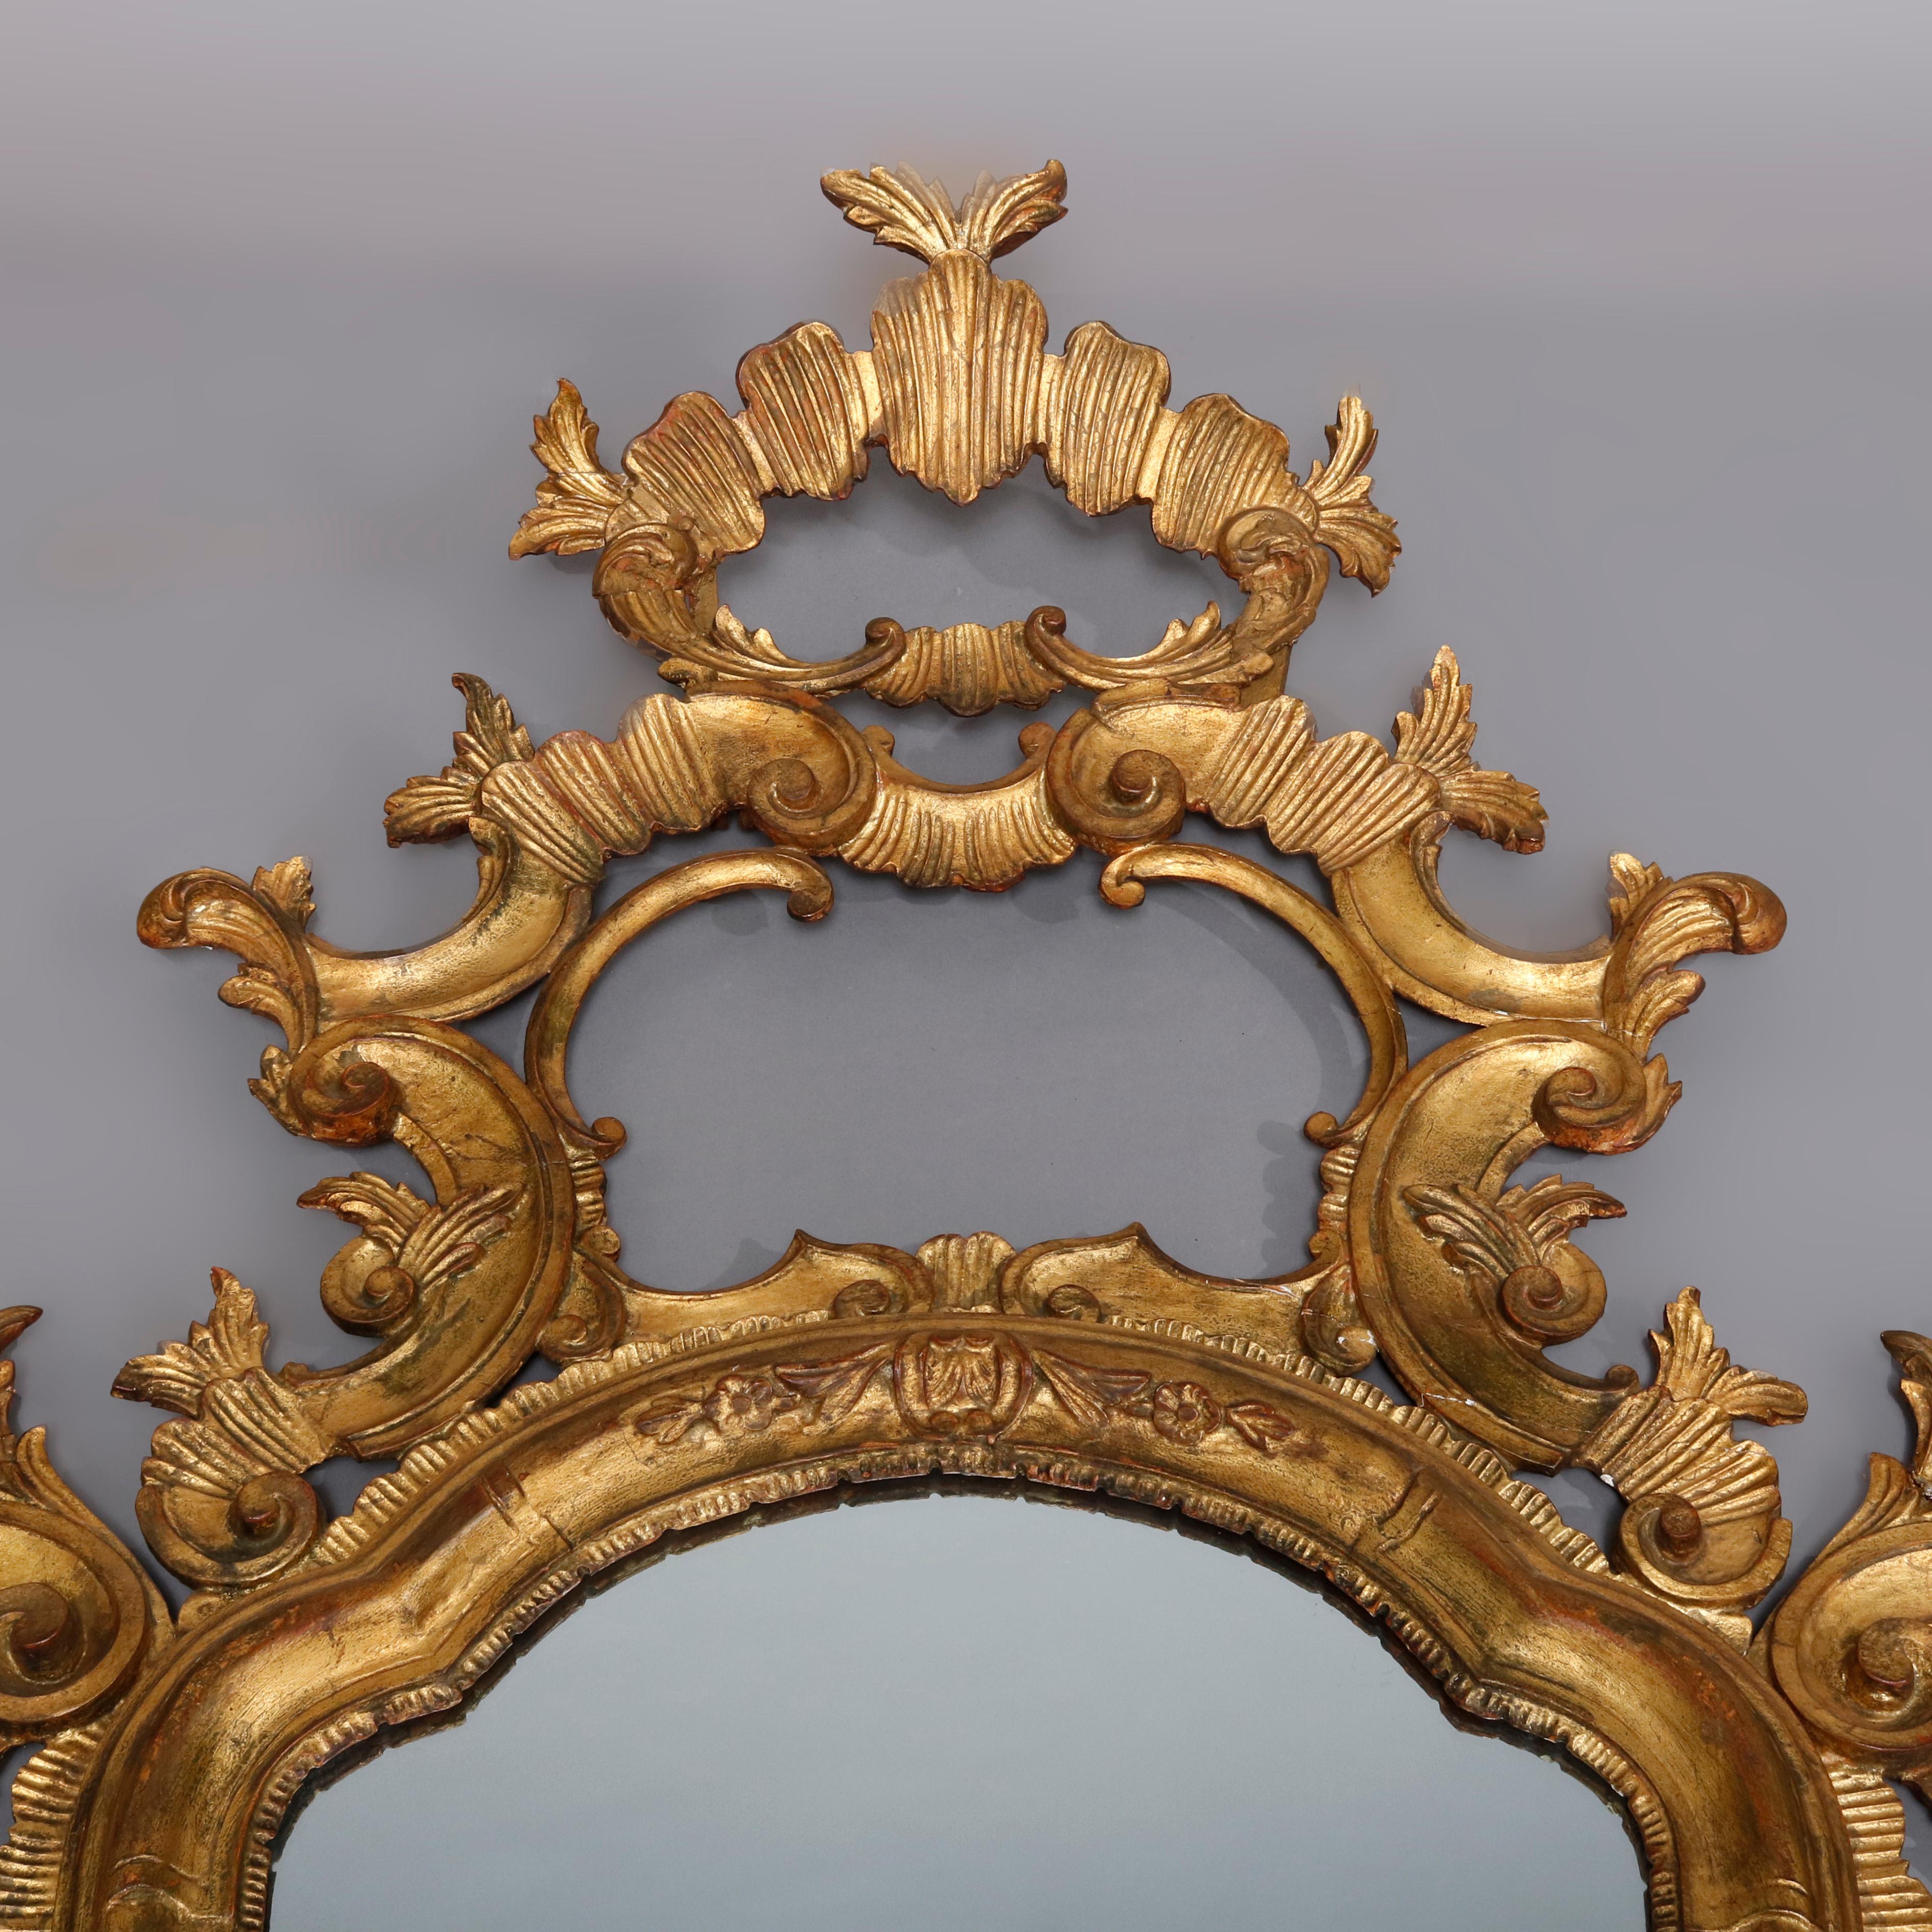 An antique pair of monumental 18th century Italian Baroque overmantel pediment mirrors offer finely sculpted giltwood frame having open foliate and scroll pediments surmounting arched mirror with pierced scroll and foliate elements throughout,